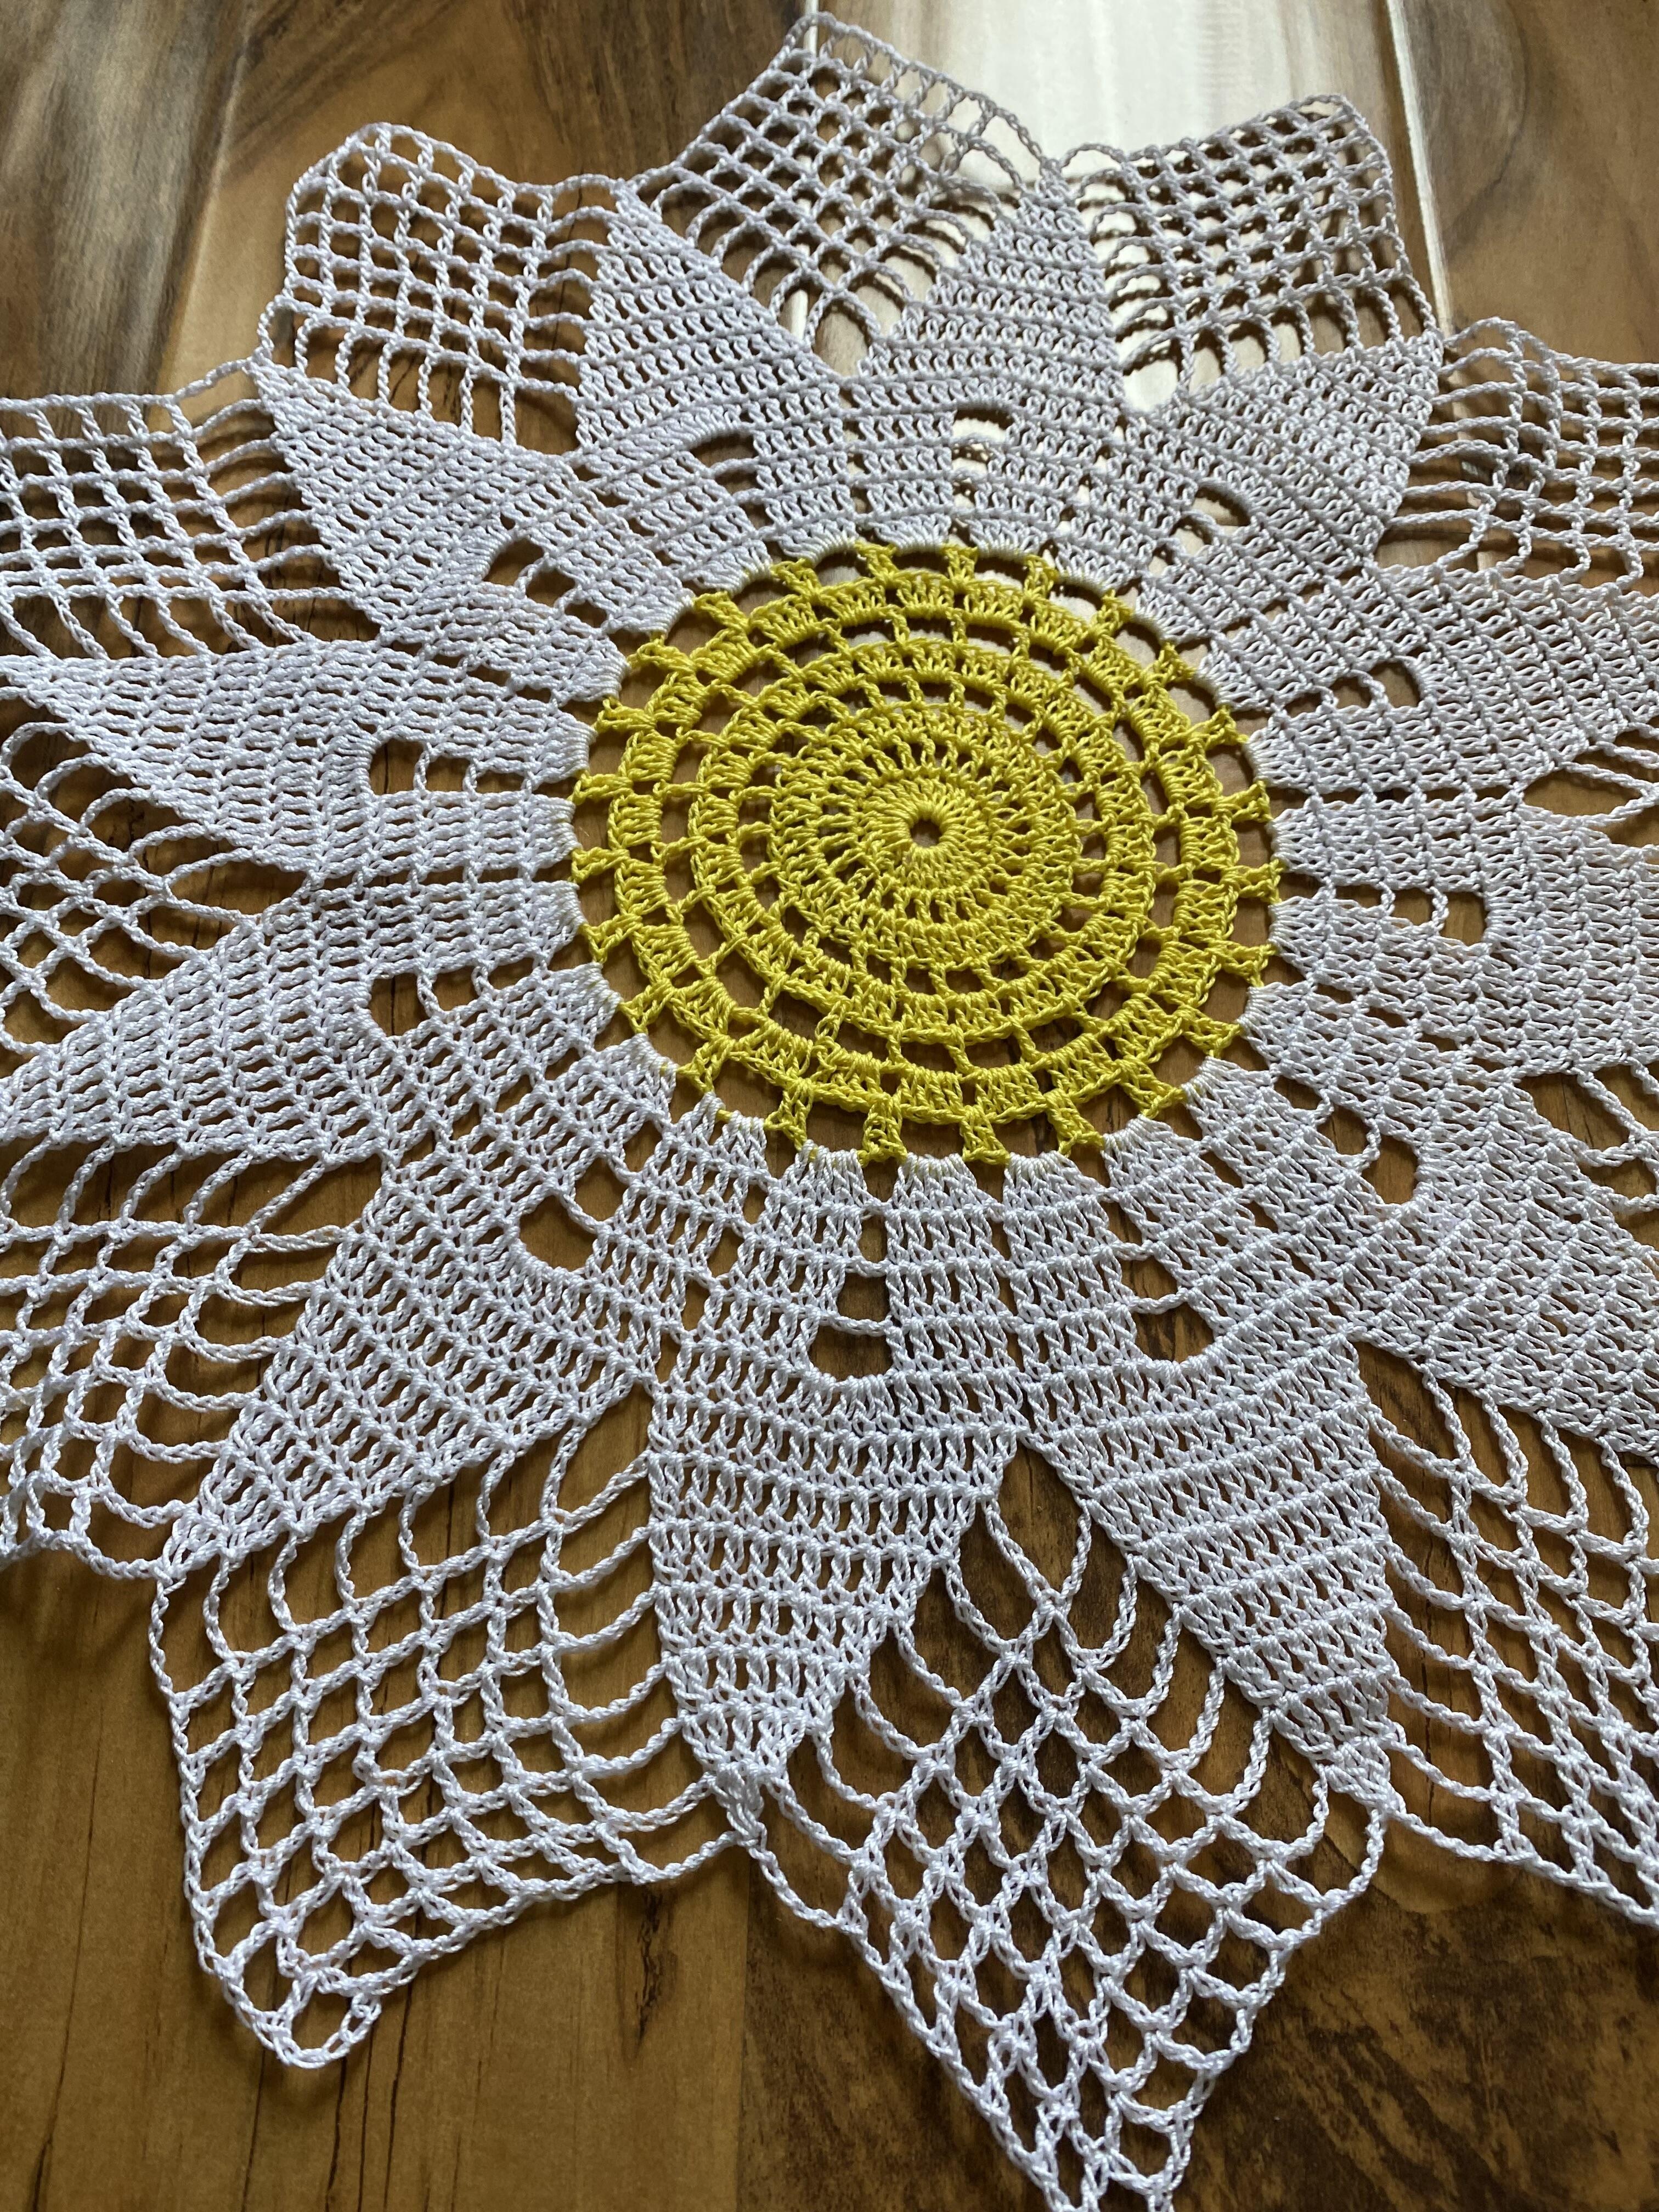 Daisy doily with bright yellow center and white petals